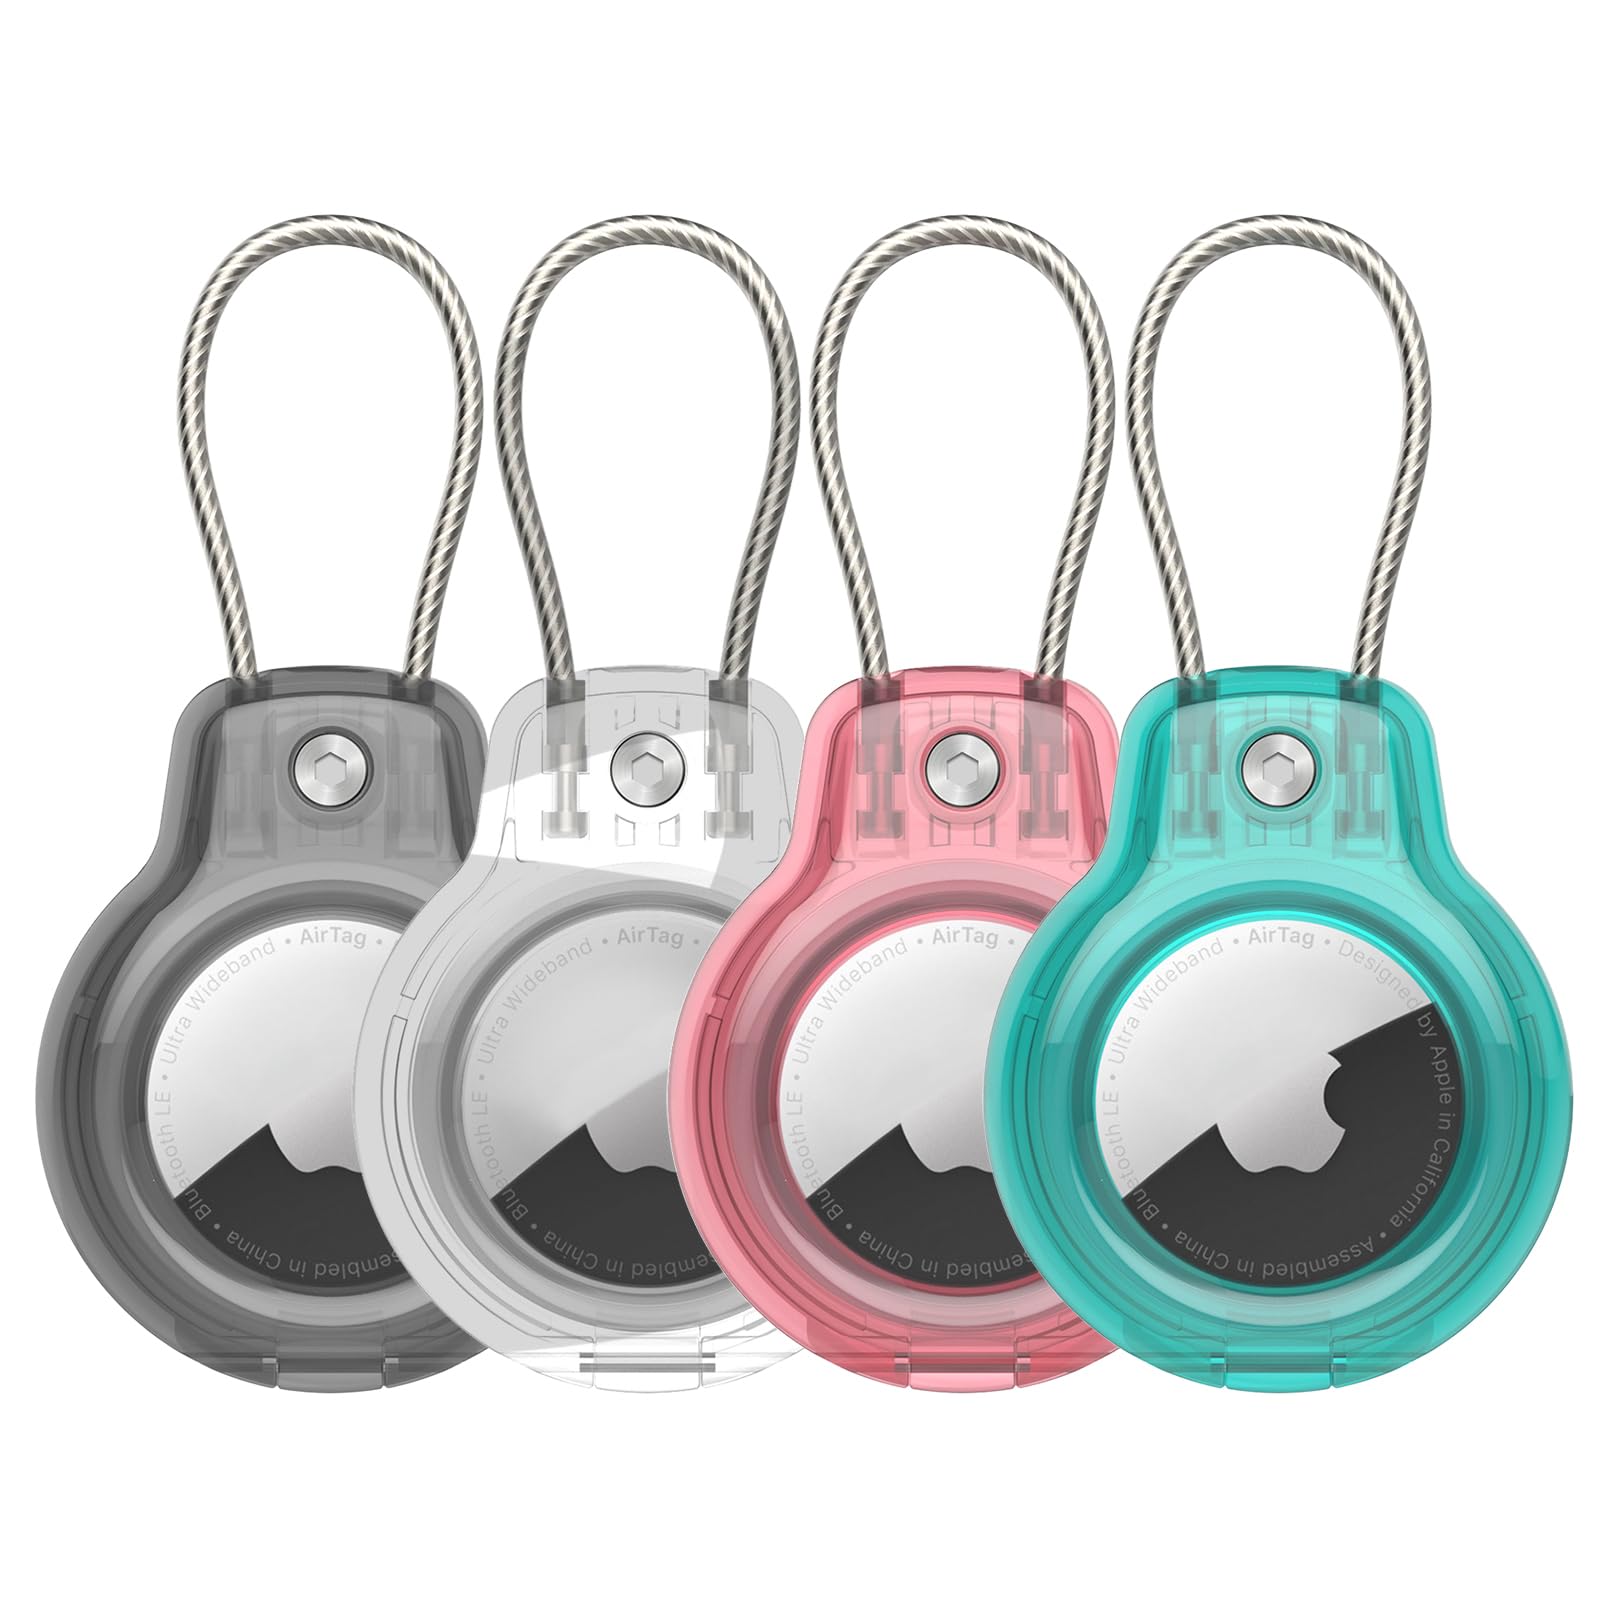 3PACK Compatible with Apple AirTag Secure Holder with Wire Cable, 3 Pack Air Tag Lock Case Keychain Key Ring Key Chain Luggage tag for Keys, Luggage & More Men Women's Keyrings & Keychains